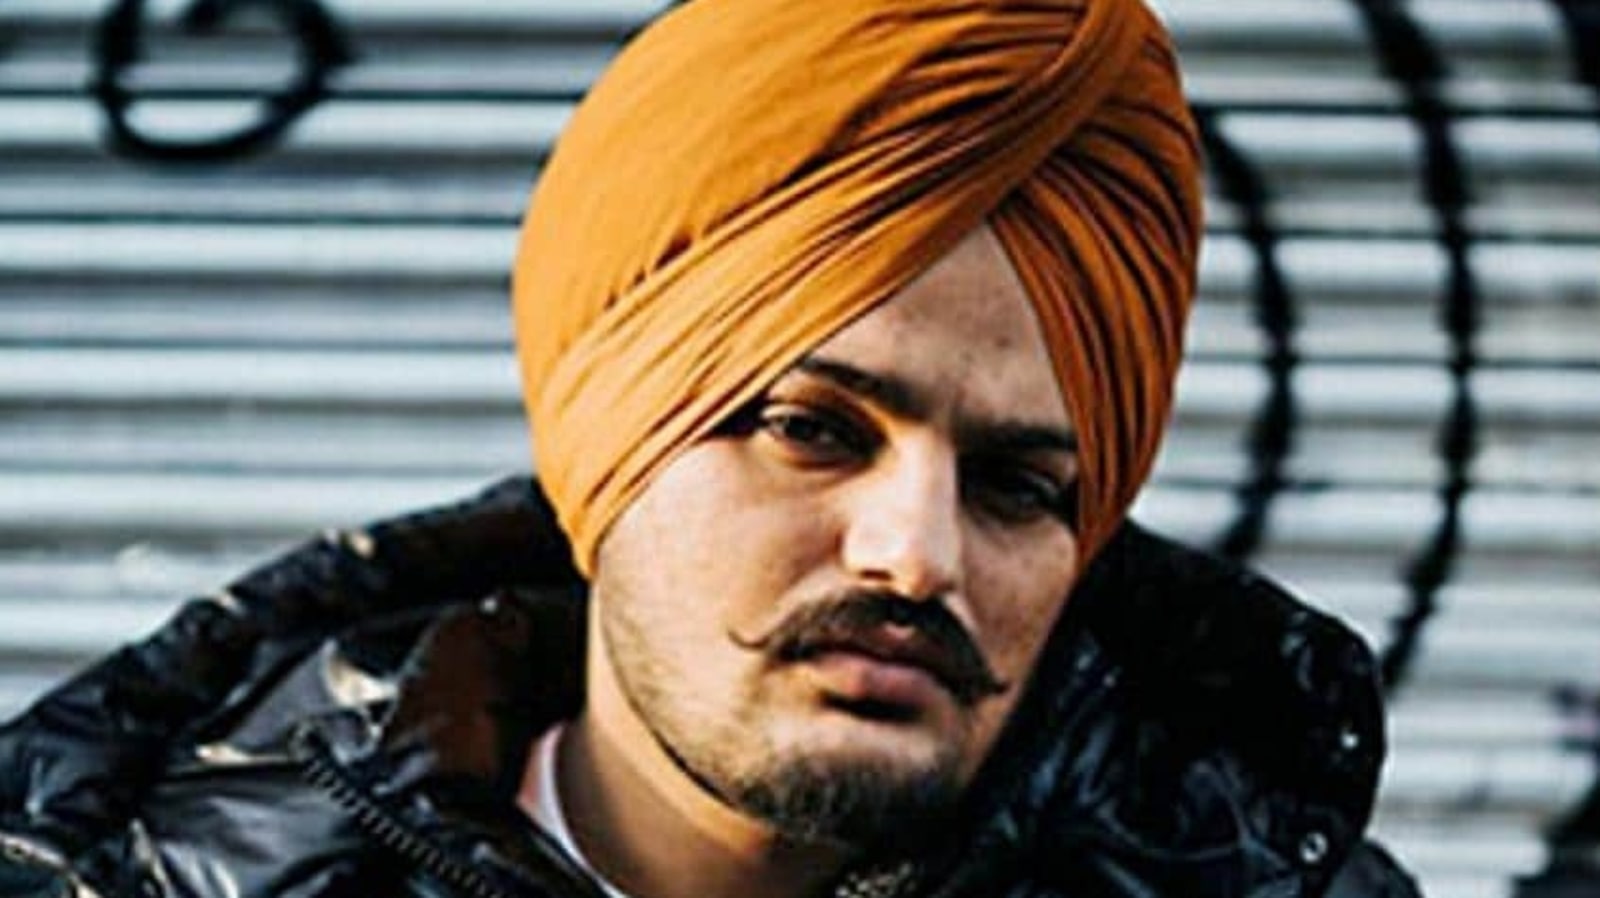 SYL: Sidhu Moose Wala’s first song after death released, fans say ‘his music will keep him alive forever’